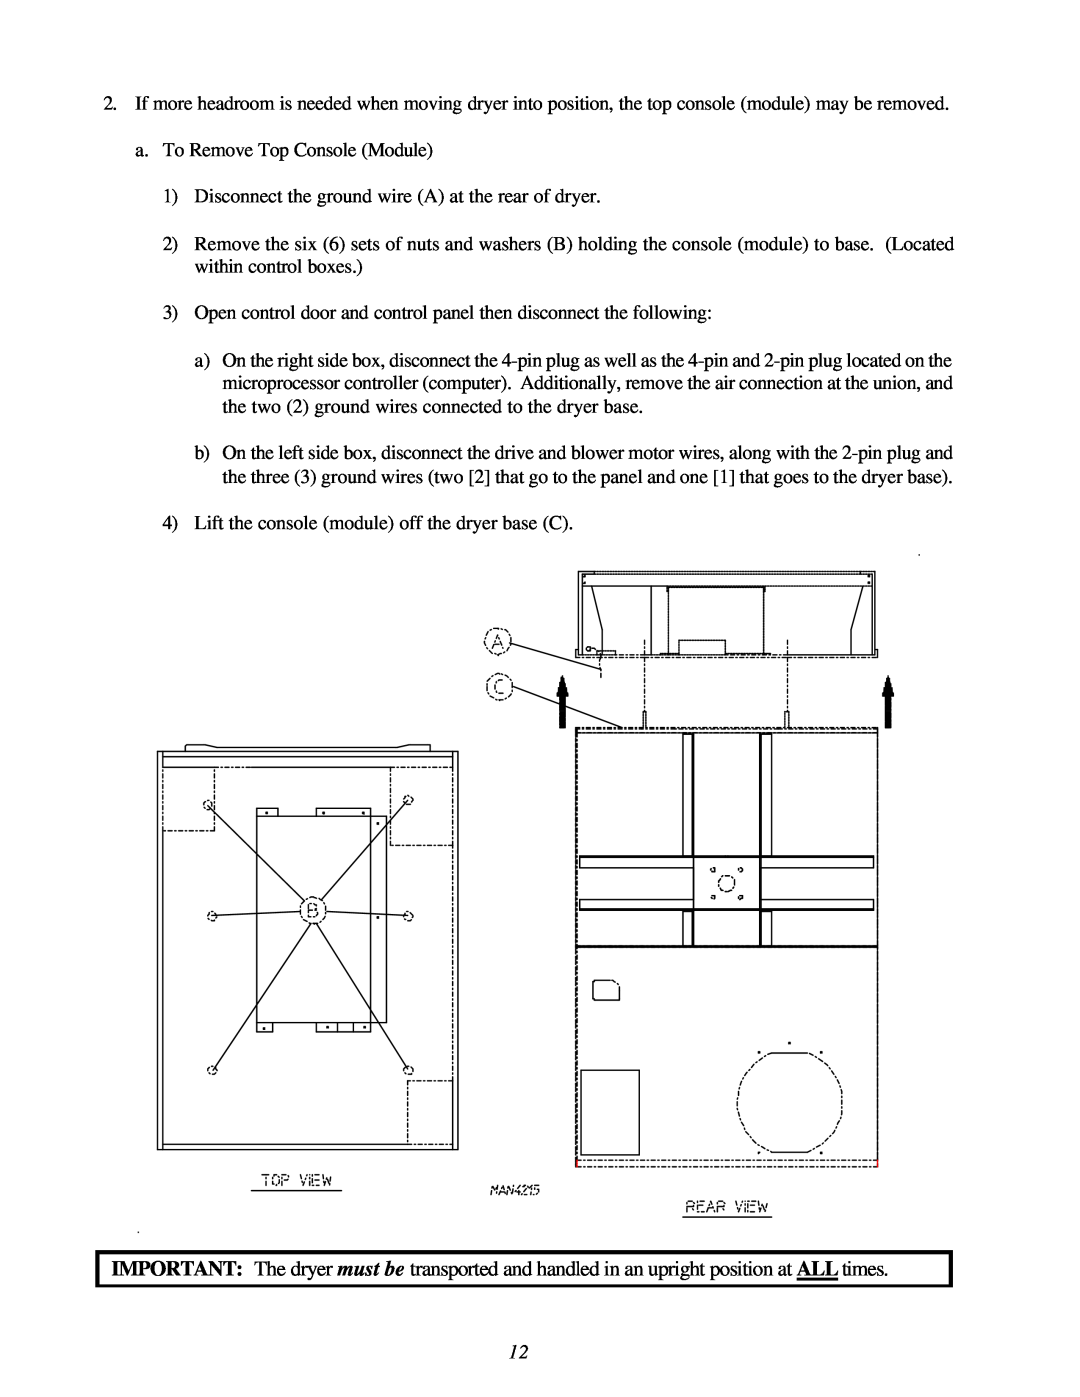 American Dryer Corp ML-122D installation manual Disconnect the ground wire A at the rear of dryer 